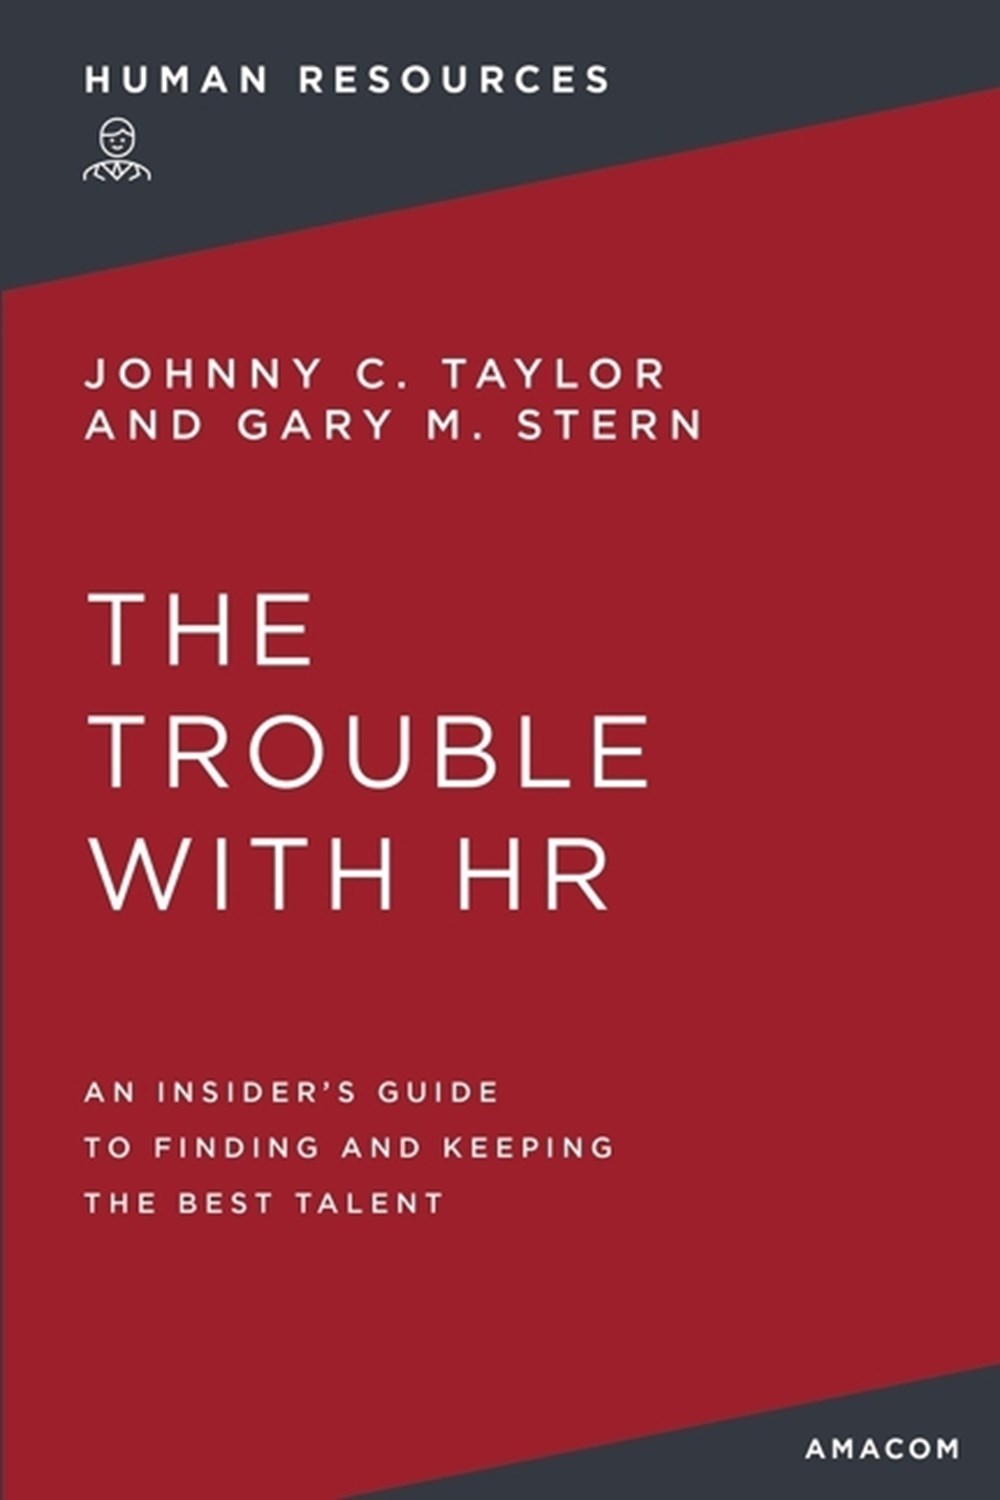 Trouble with HR: An Insider's Guide to Finding and Keeping the Best Talent